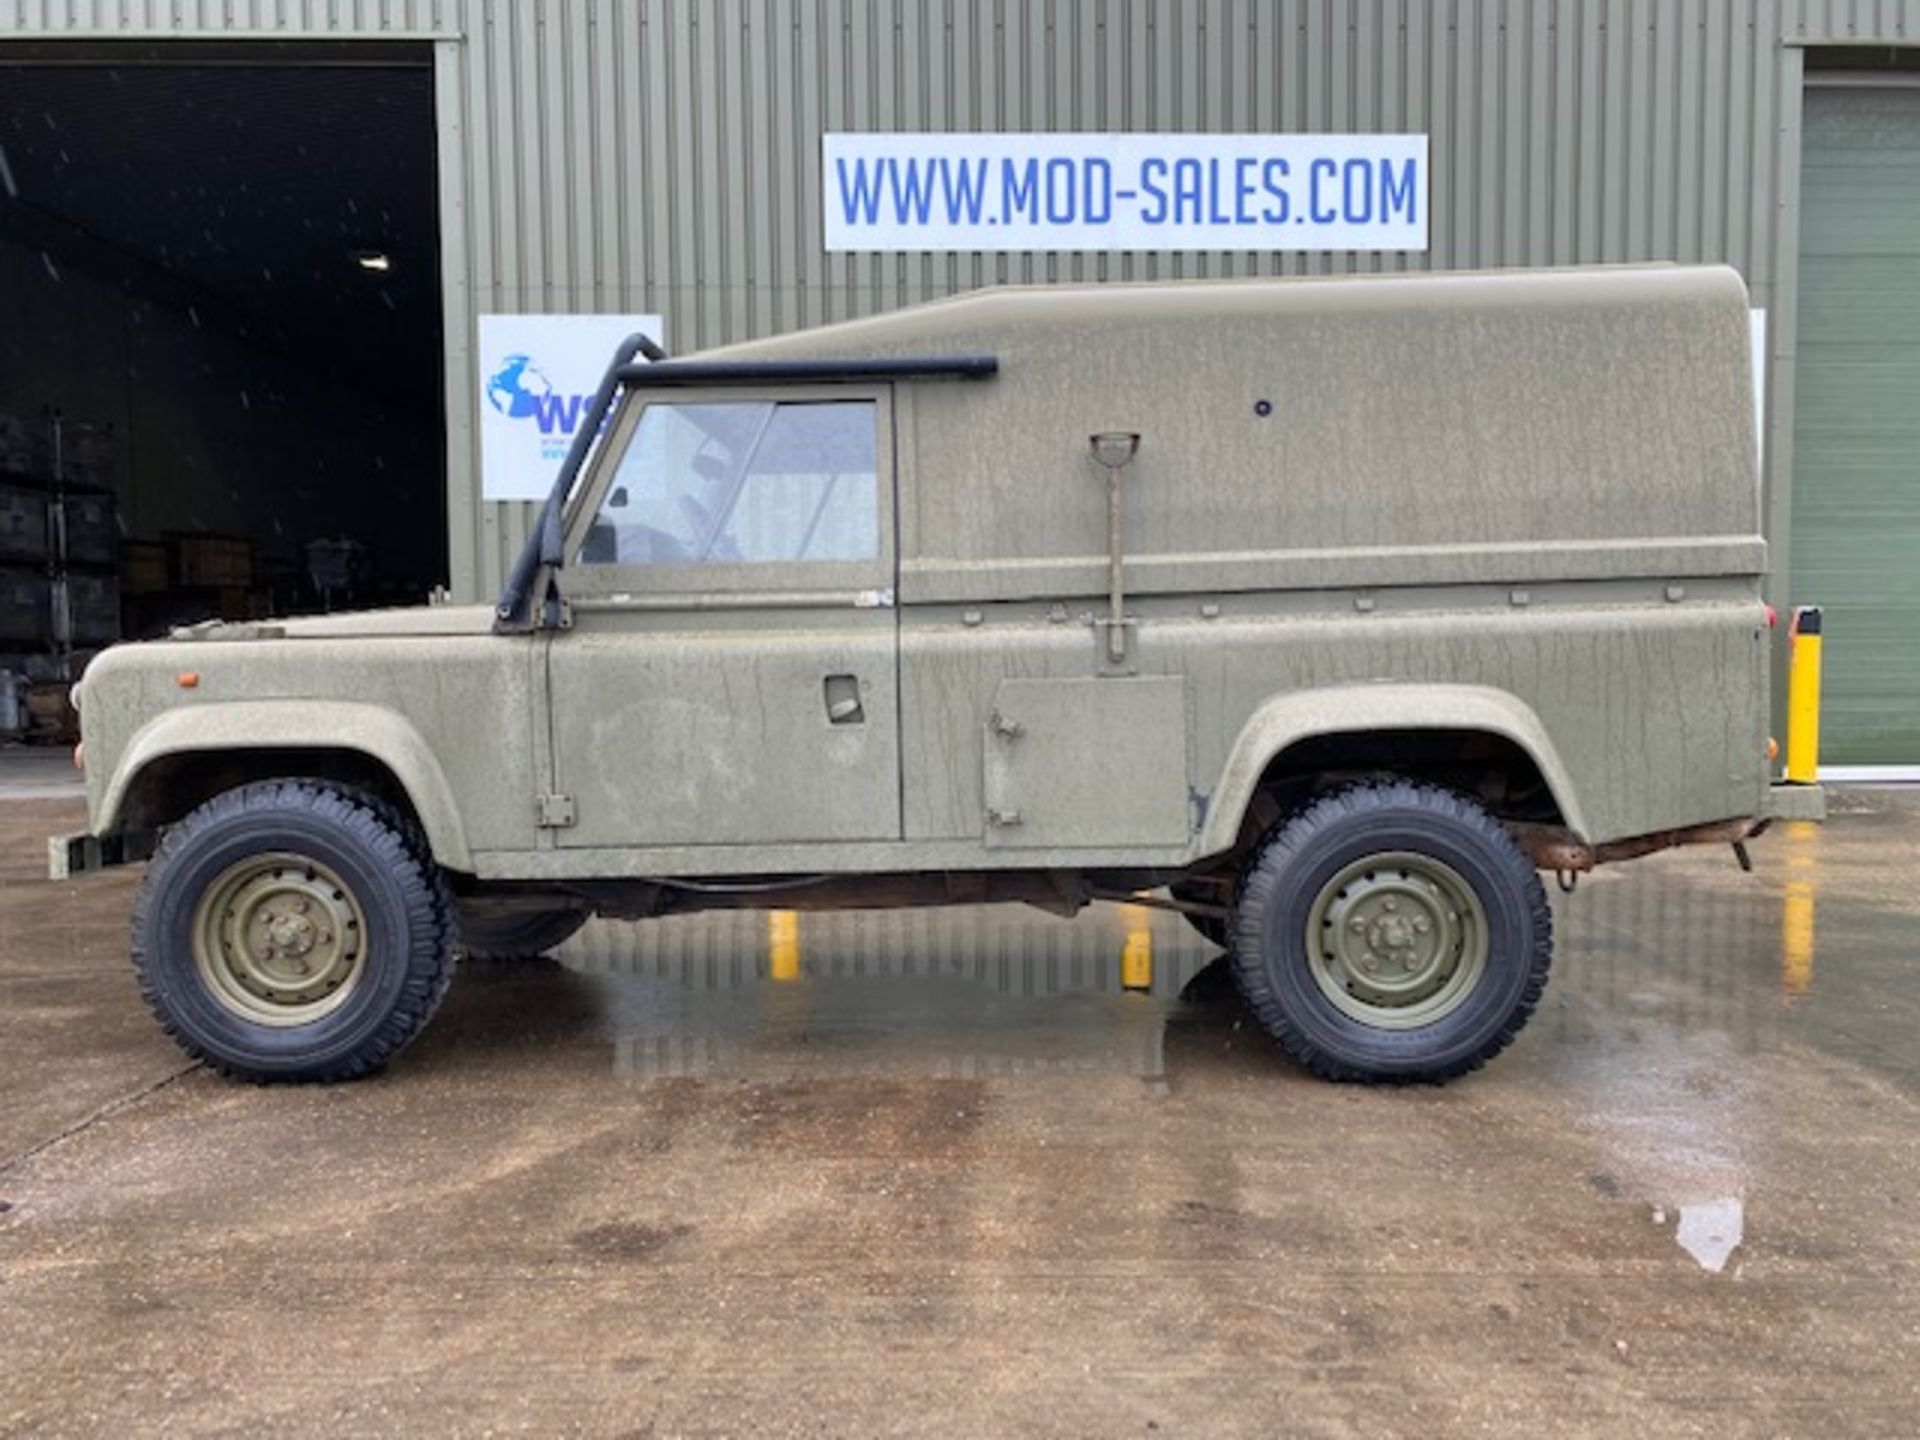 1995 Left Hand Drive Land Rover 110 Tithonus hardtop ONLY 66,824 km - Image 2 of 47